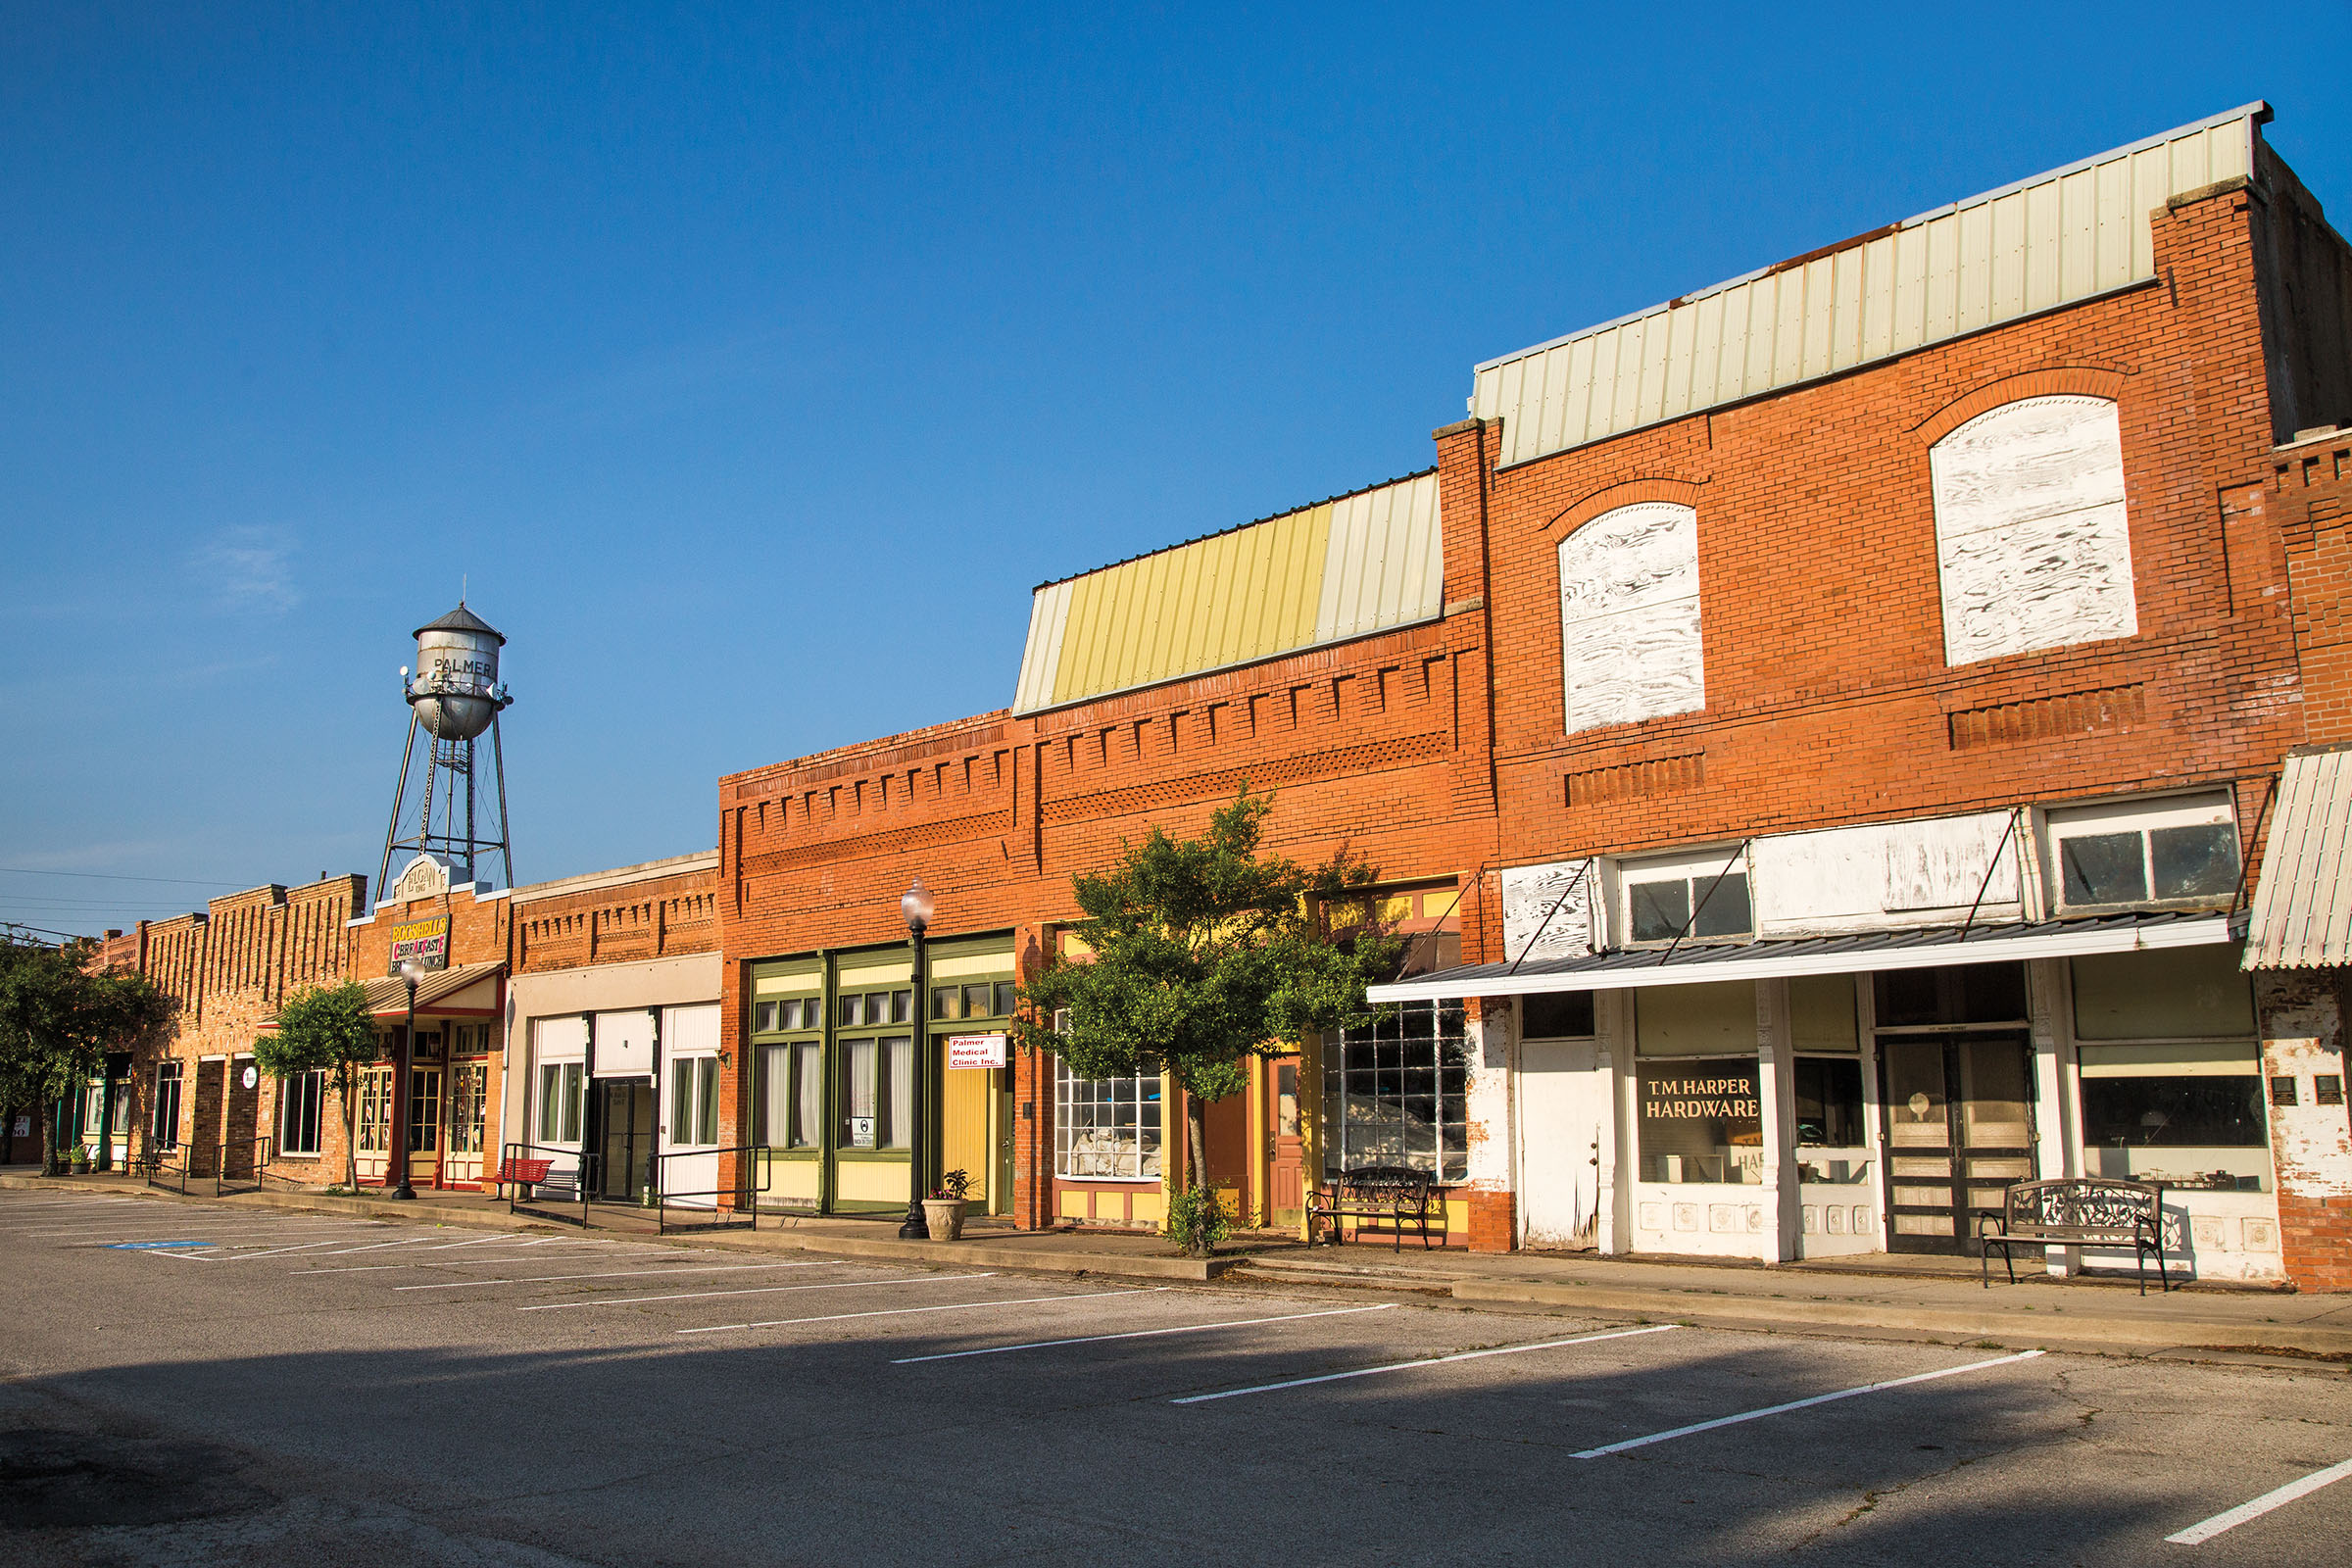 The exterior of brick buildings along a historic main street with a large metal water tower